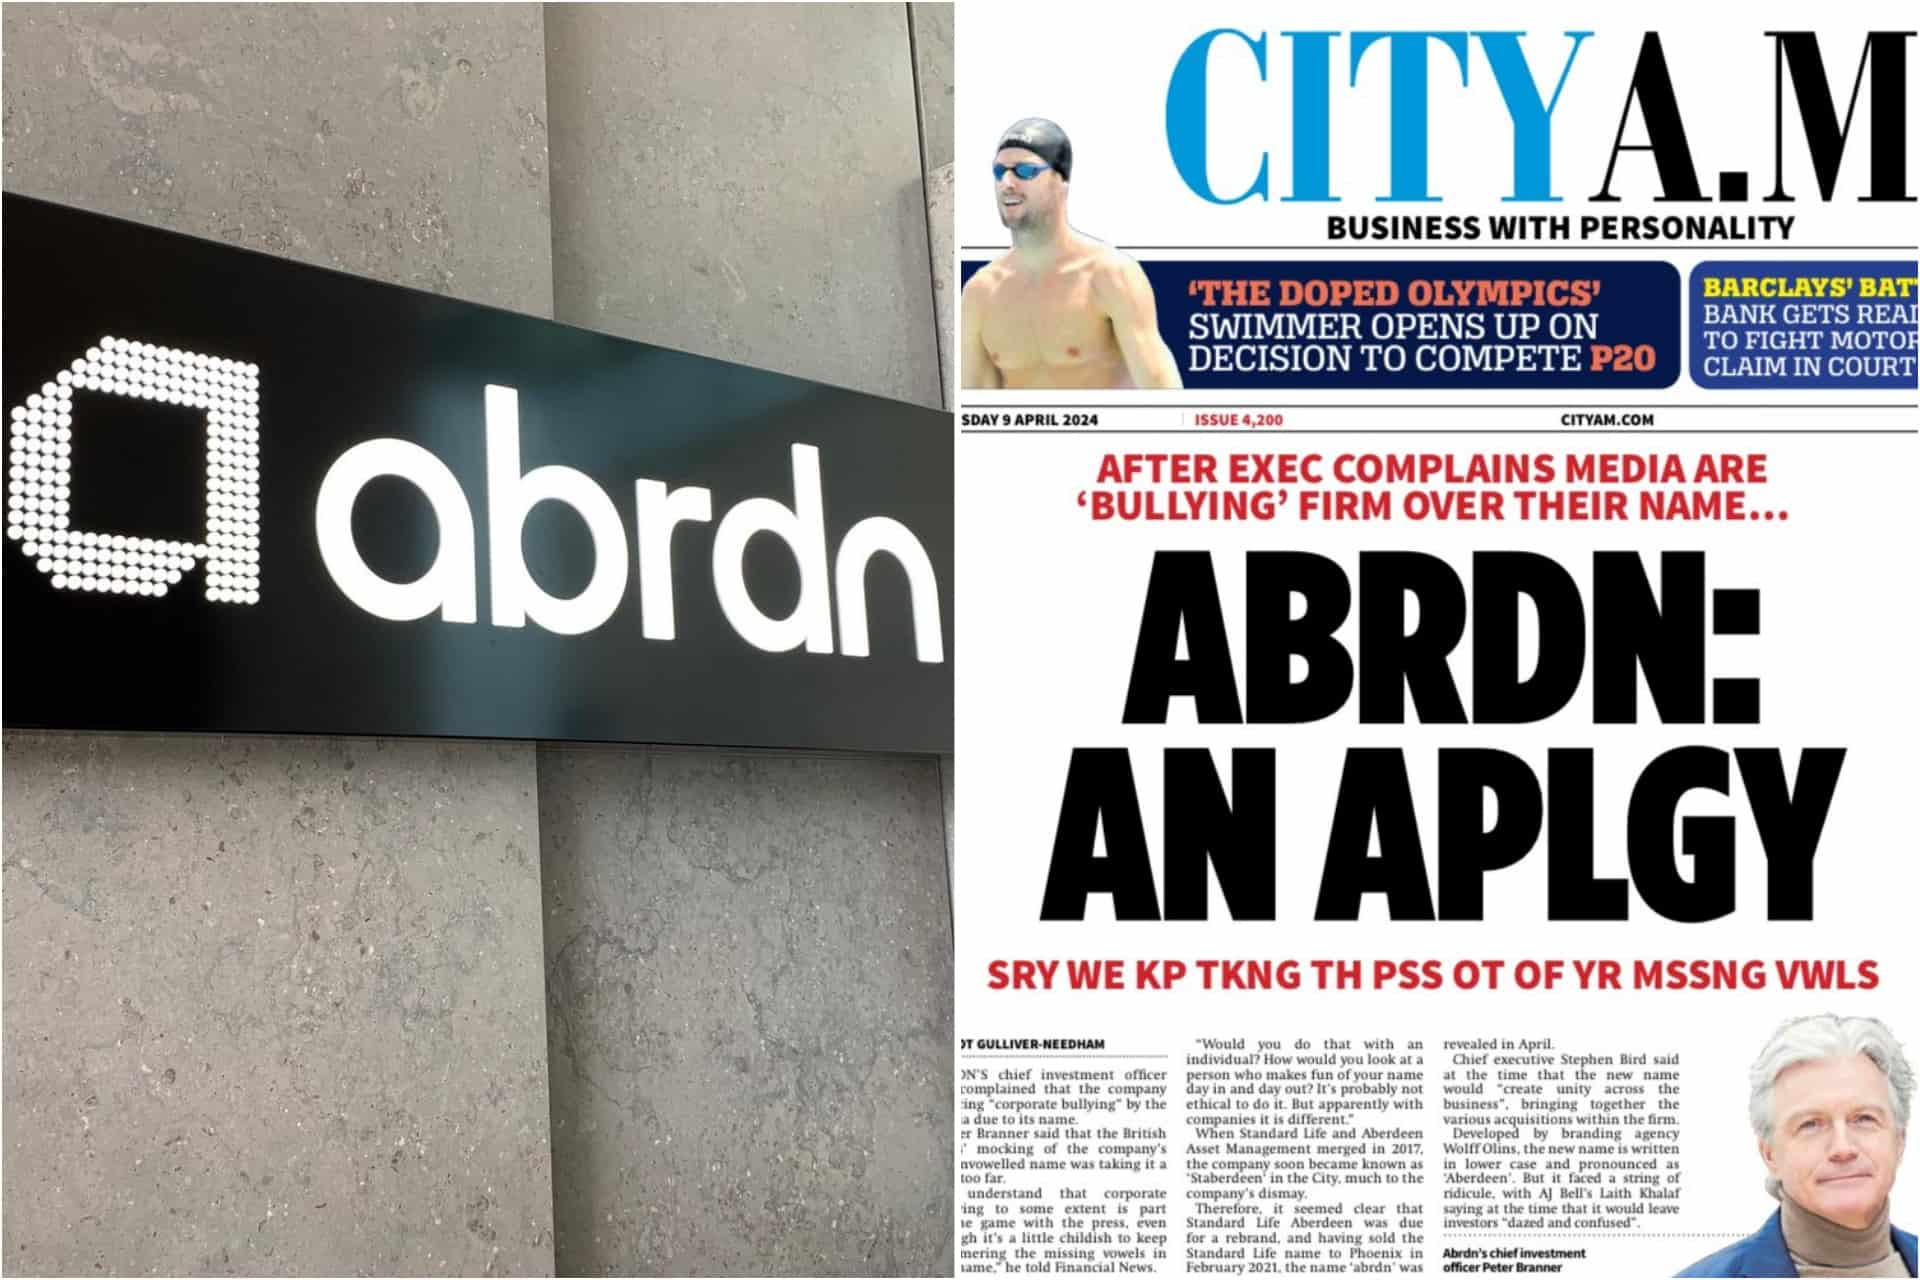 City AM issues hilarious apology over ‘missing vowels’ re-brand